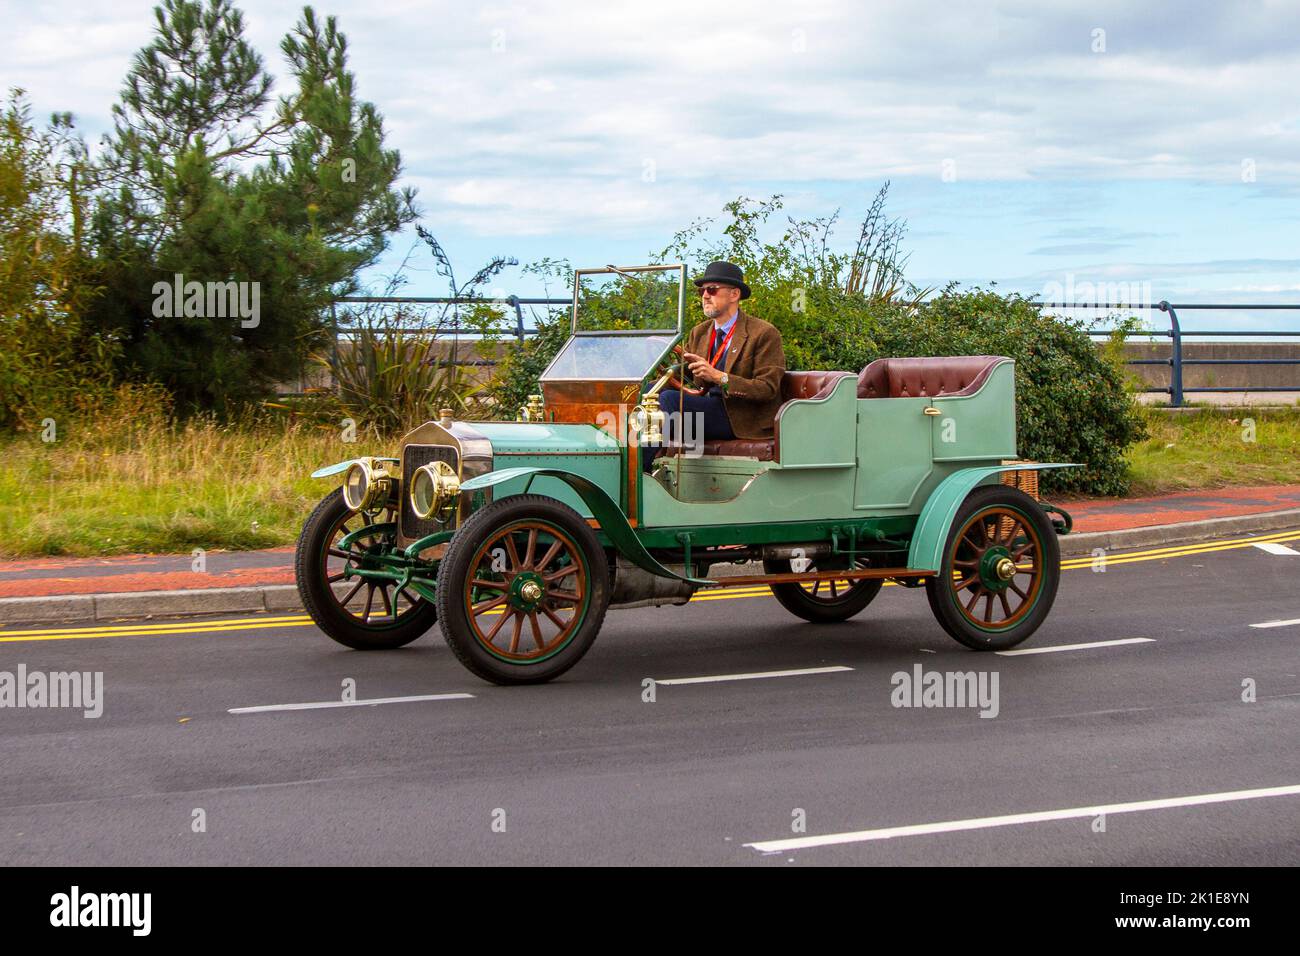 1910 Southport Built VULCAN jalopy; on display at the Southport Classic car and Speed event on the seafront promenade. UK Stock Photo